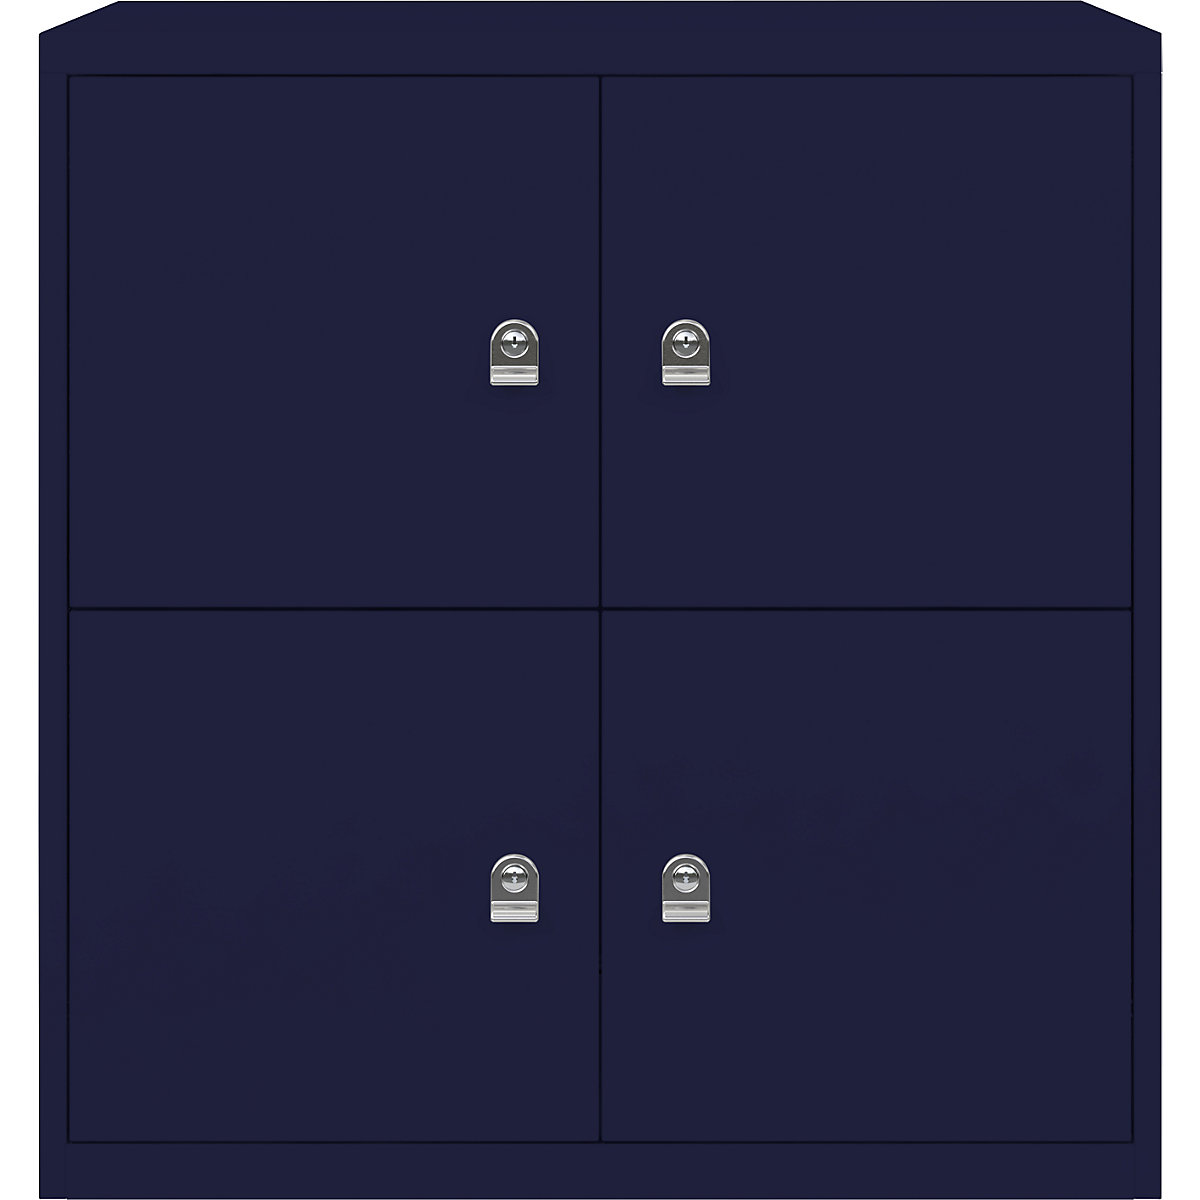 BISLEY – LateralFile™ lodge, with 4 lockable compartments, height 375 mm each, oxford blue